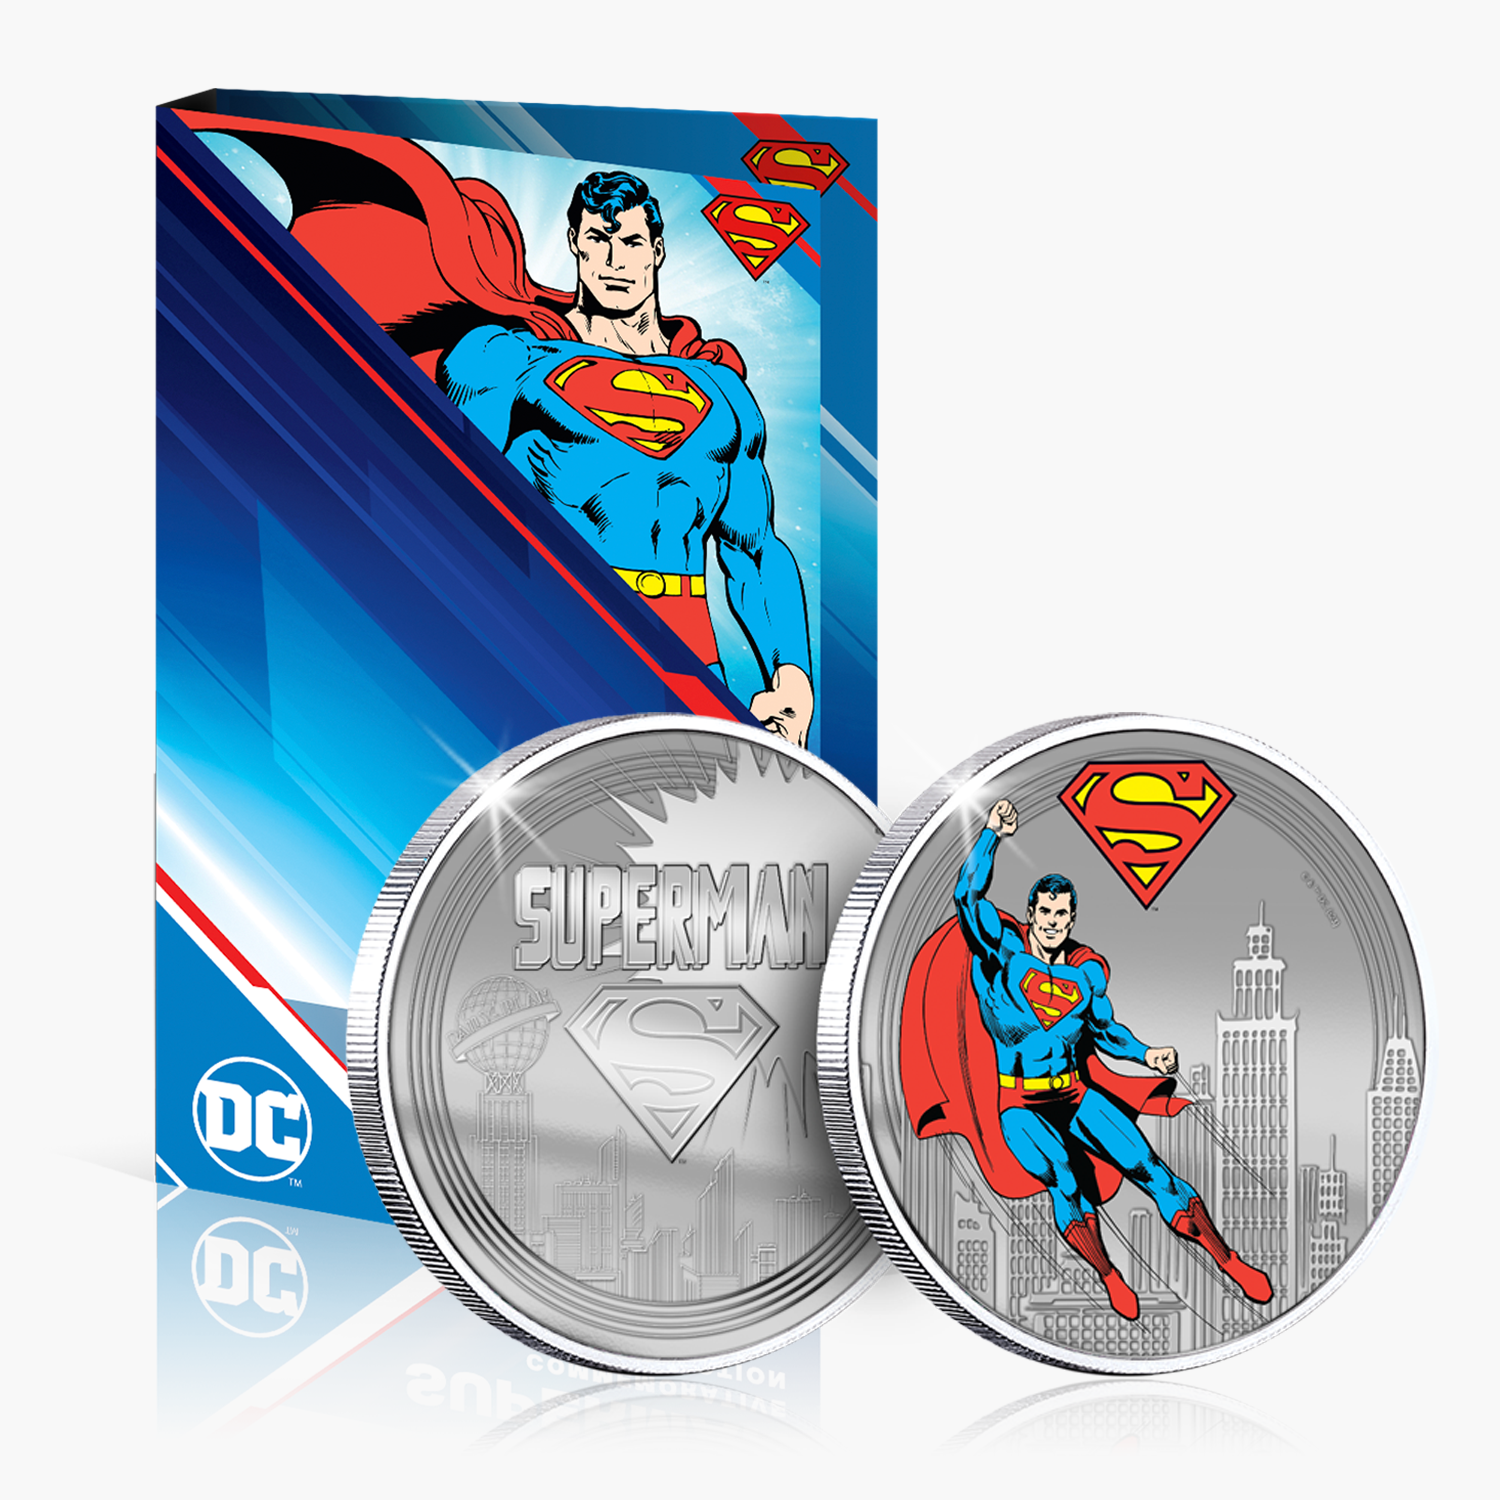 The Official DC Comics .999 Silver Plated Proof Superman Collection